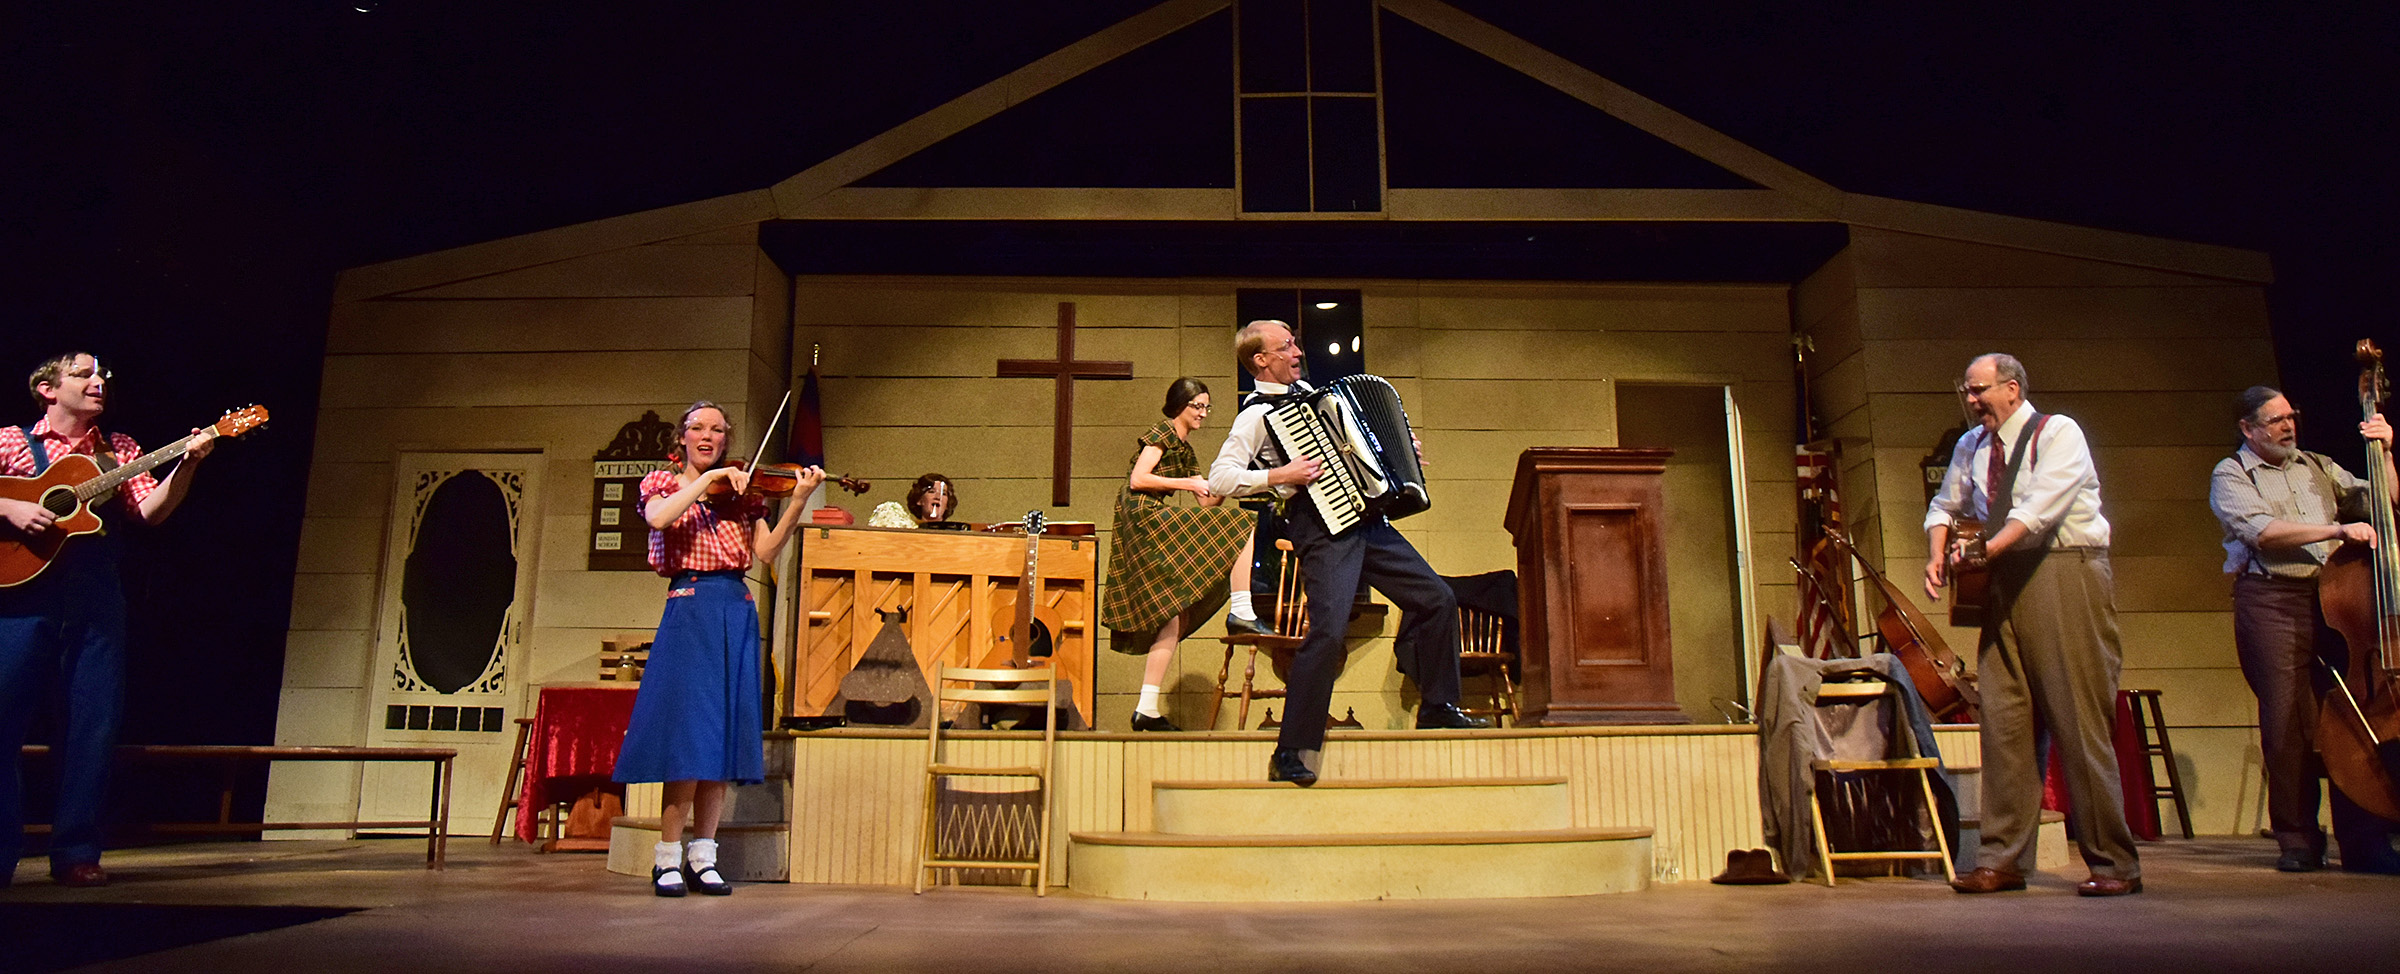 The Rev. Oglethorpe (A.J. Morrison), center, grabs his accordion to play along as the Singing Sanders Family performs 